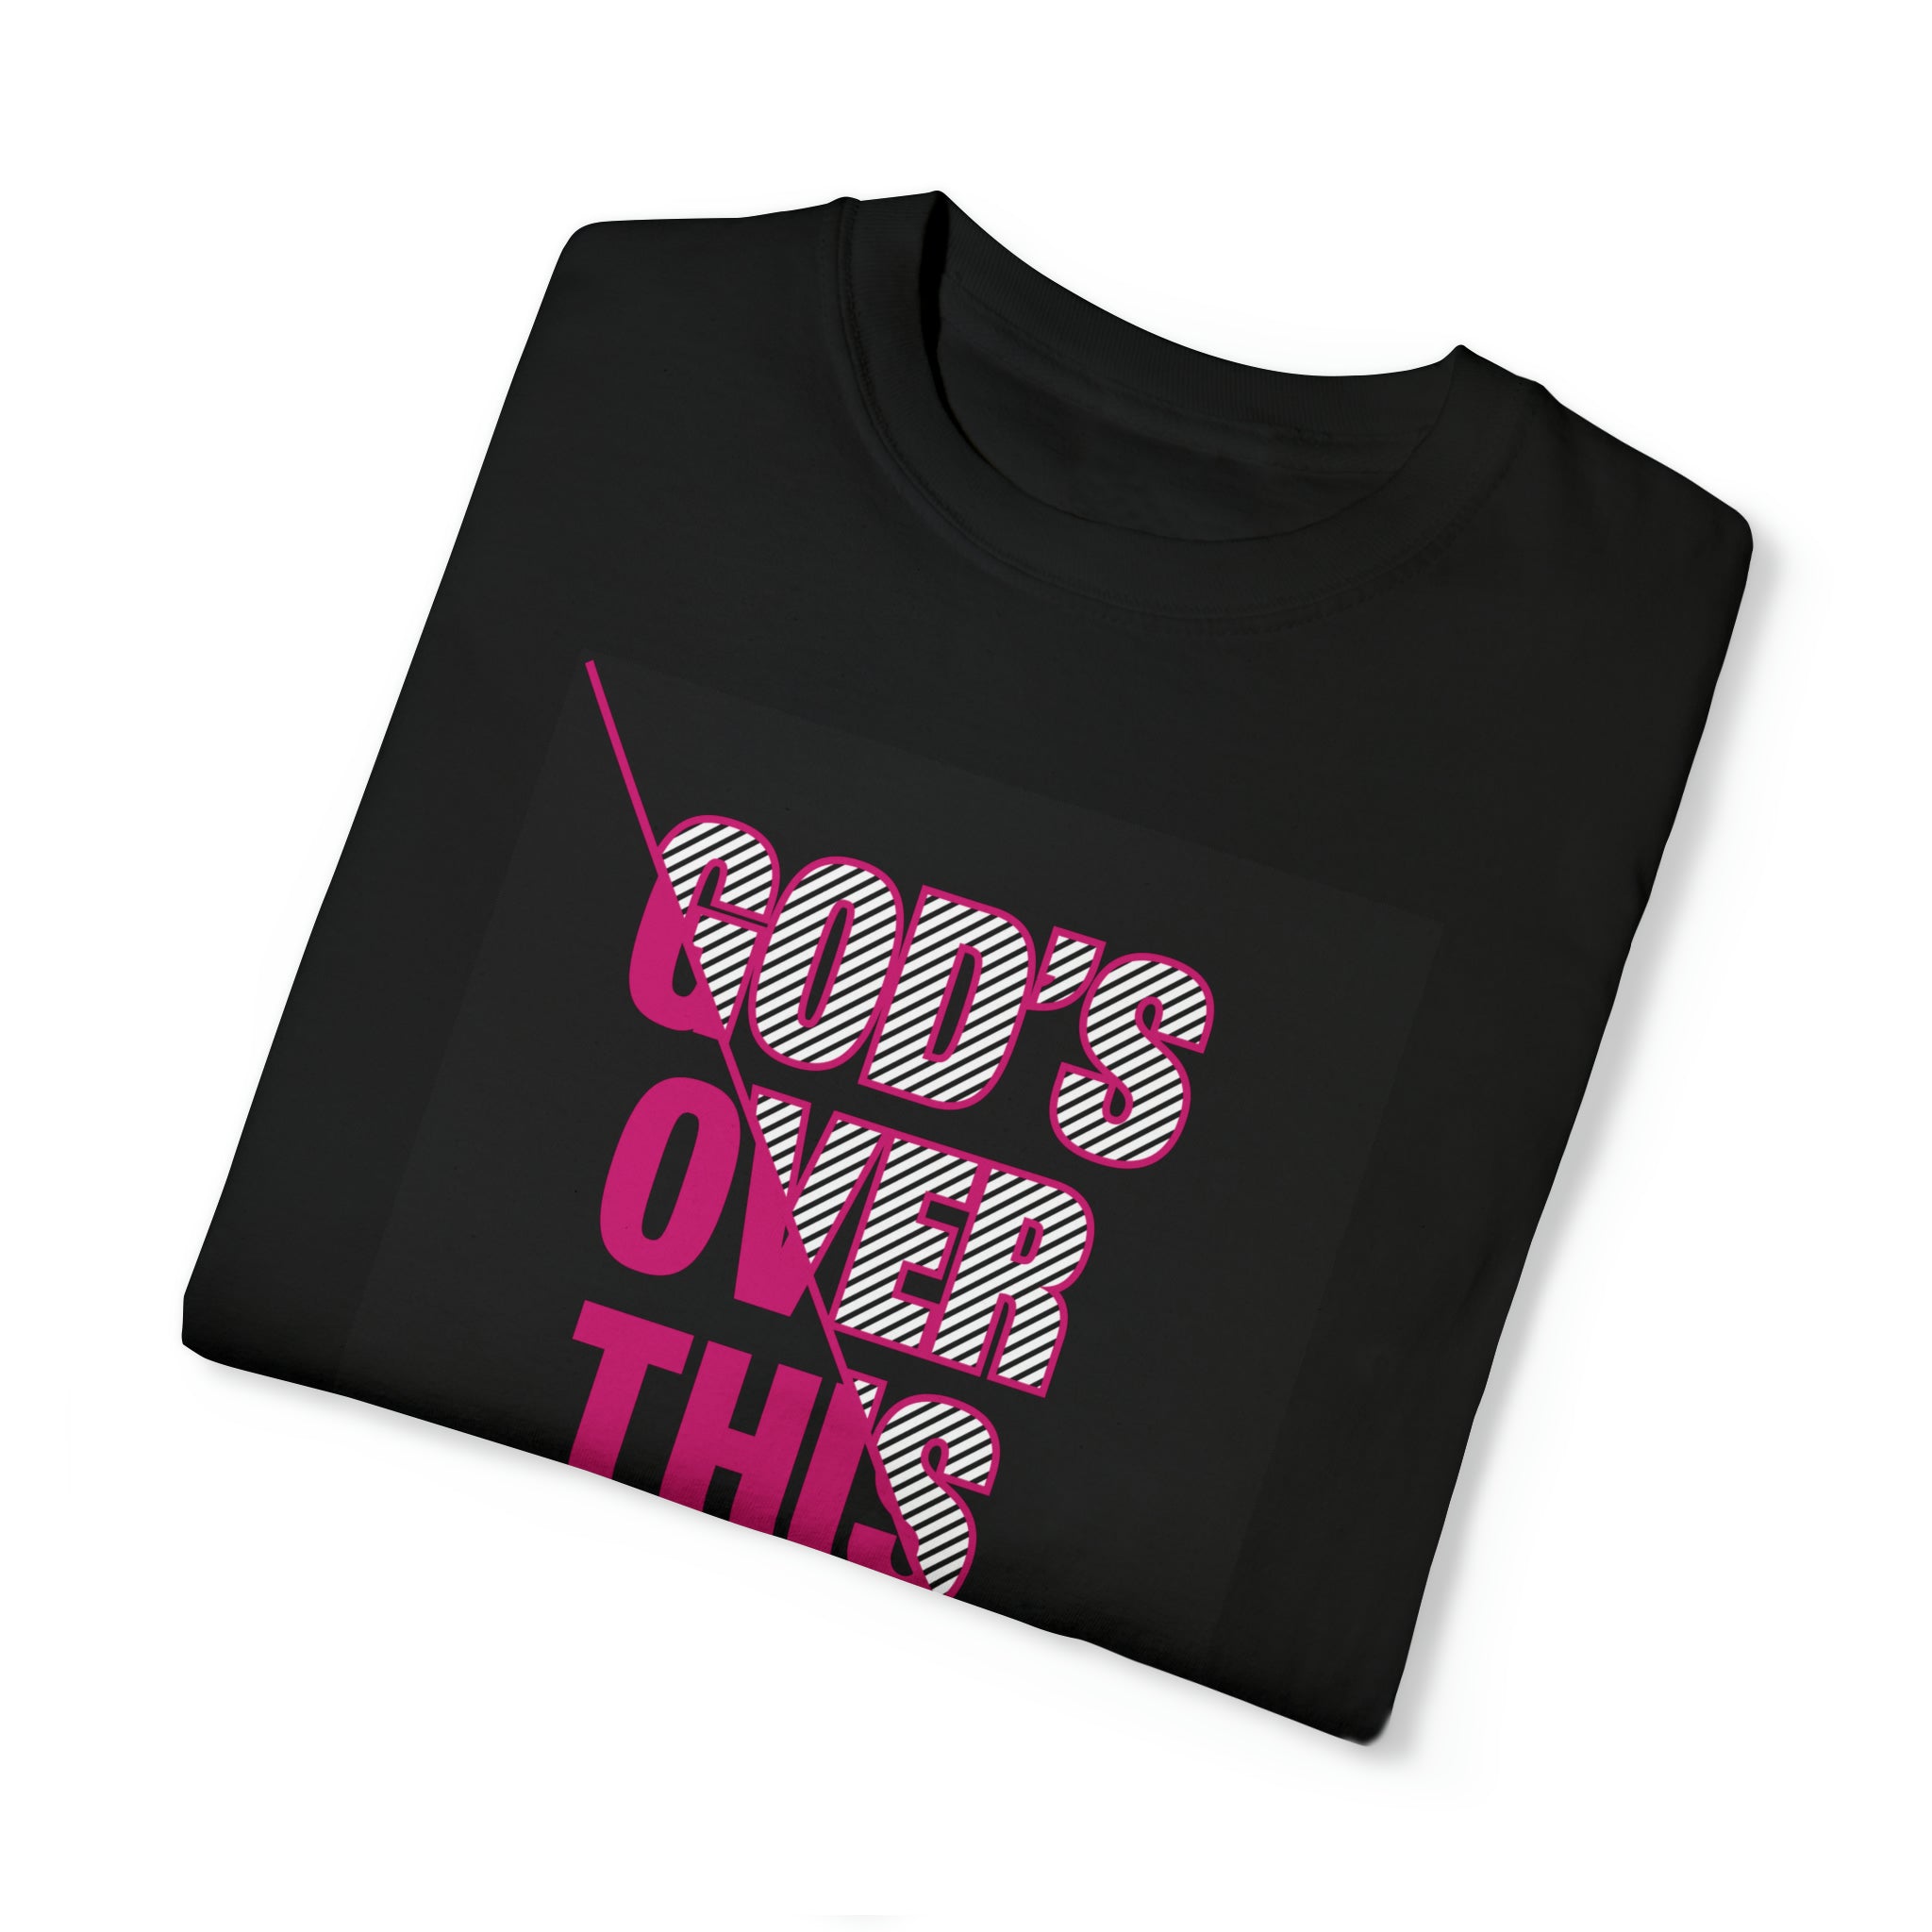 GODs' Over This Woman Pink -Unisex Garment-Dyed T-shirt